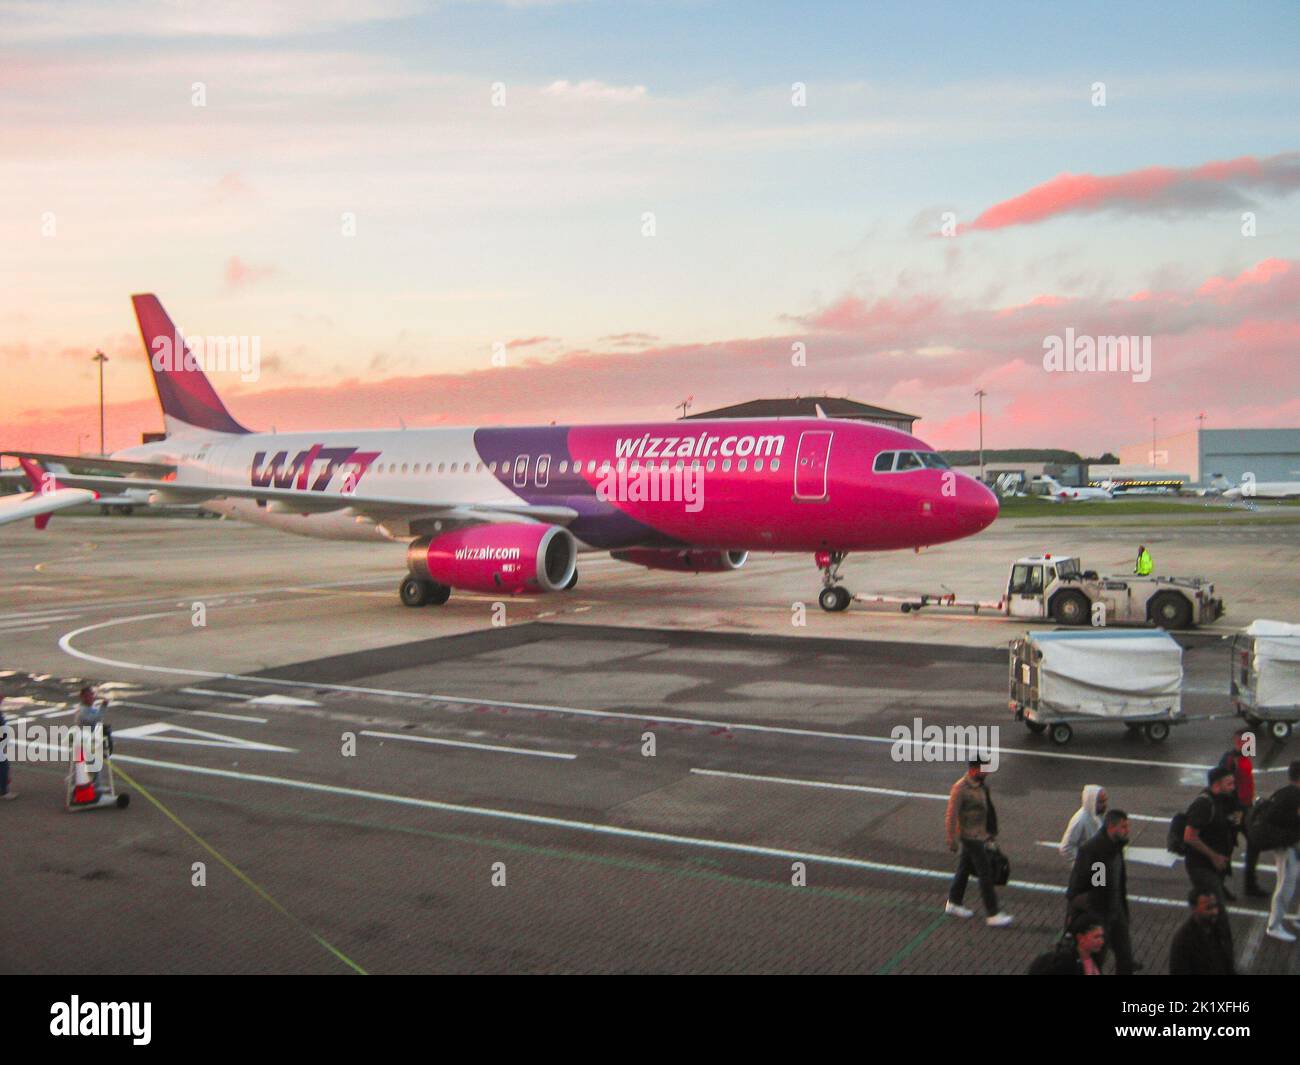 Beautiful sunset over the Luton airport near London, with Wizz Air airplane Stock Photo